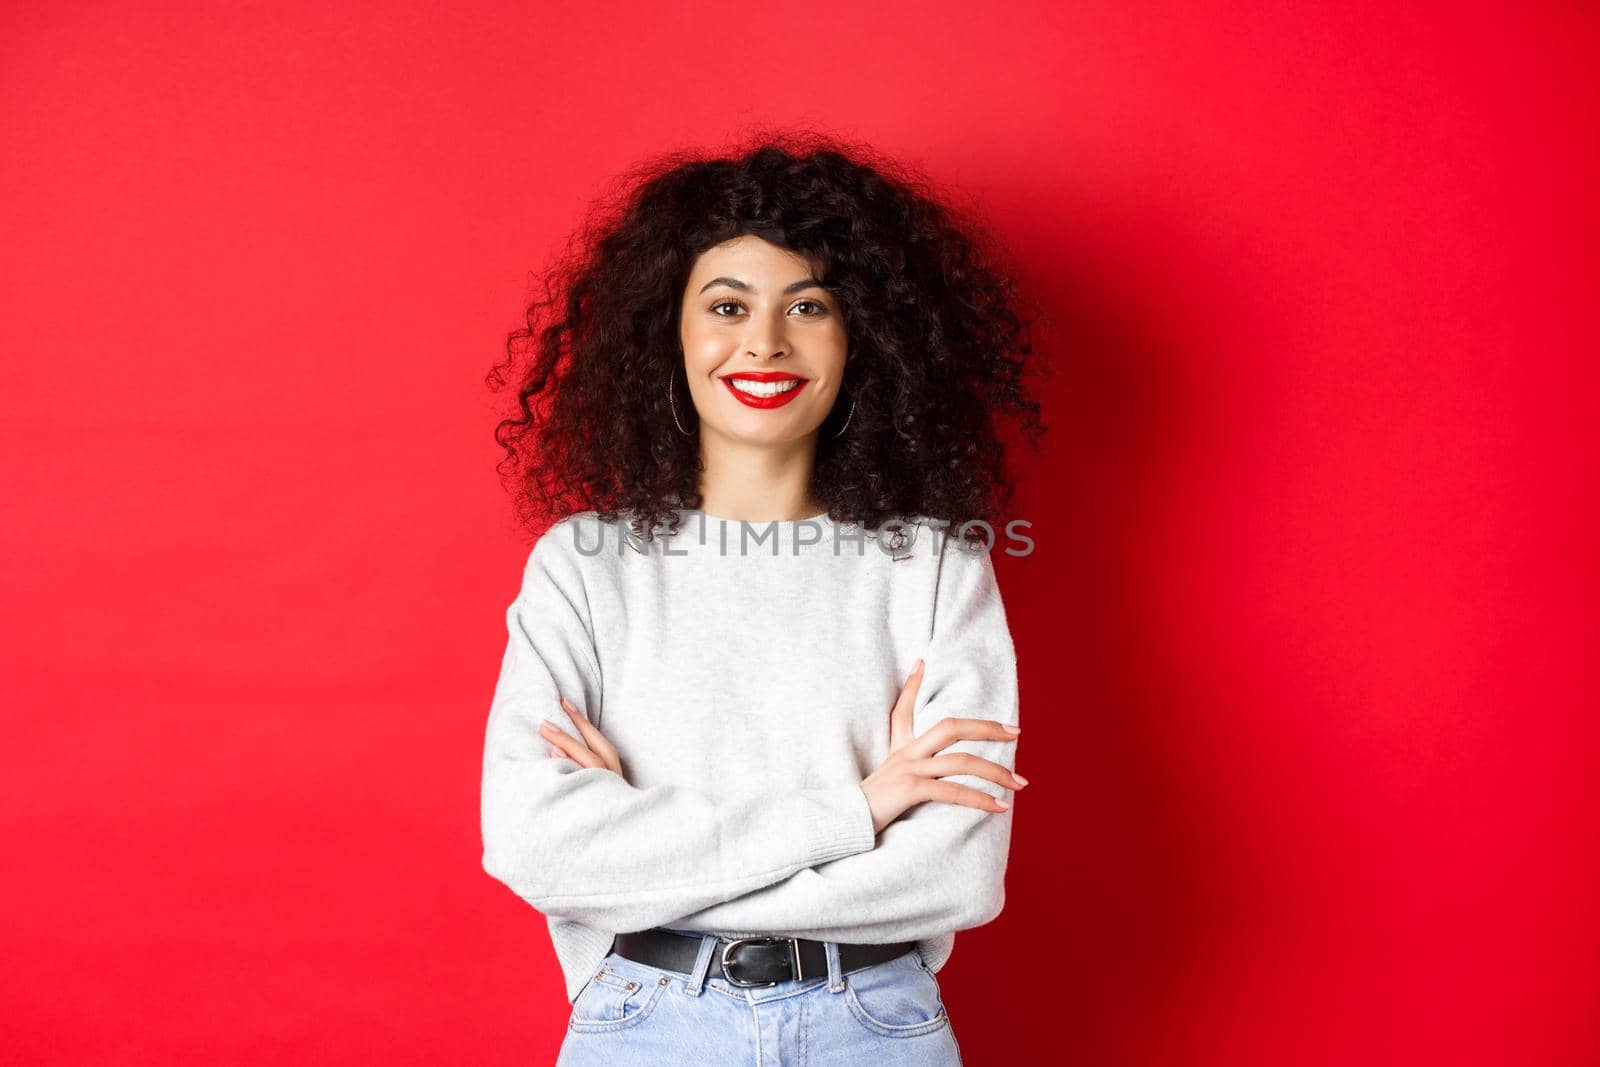 Confident smiling woman with makeup and curly hairstyle, cross arms on chest and looking professional, red background.